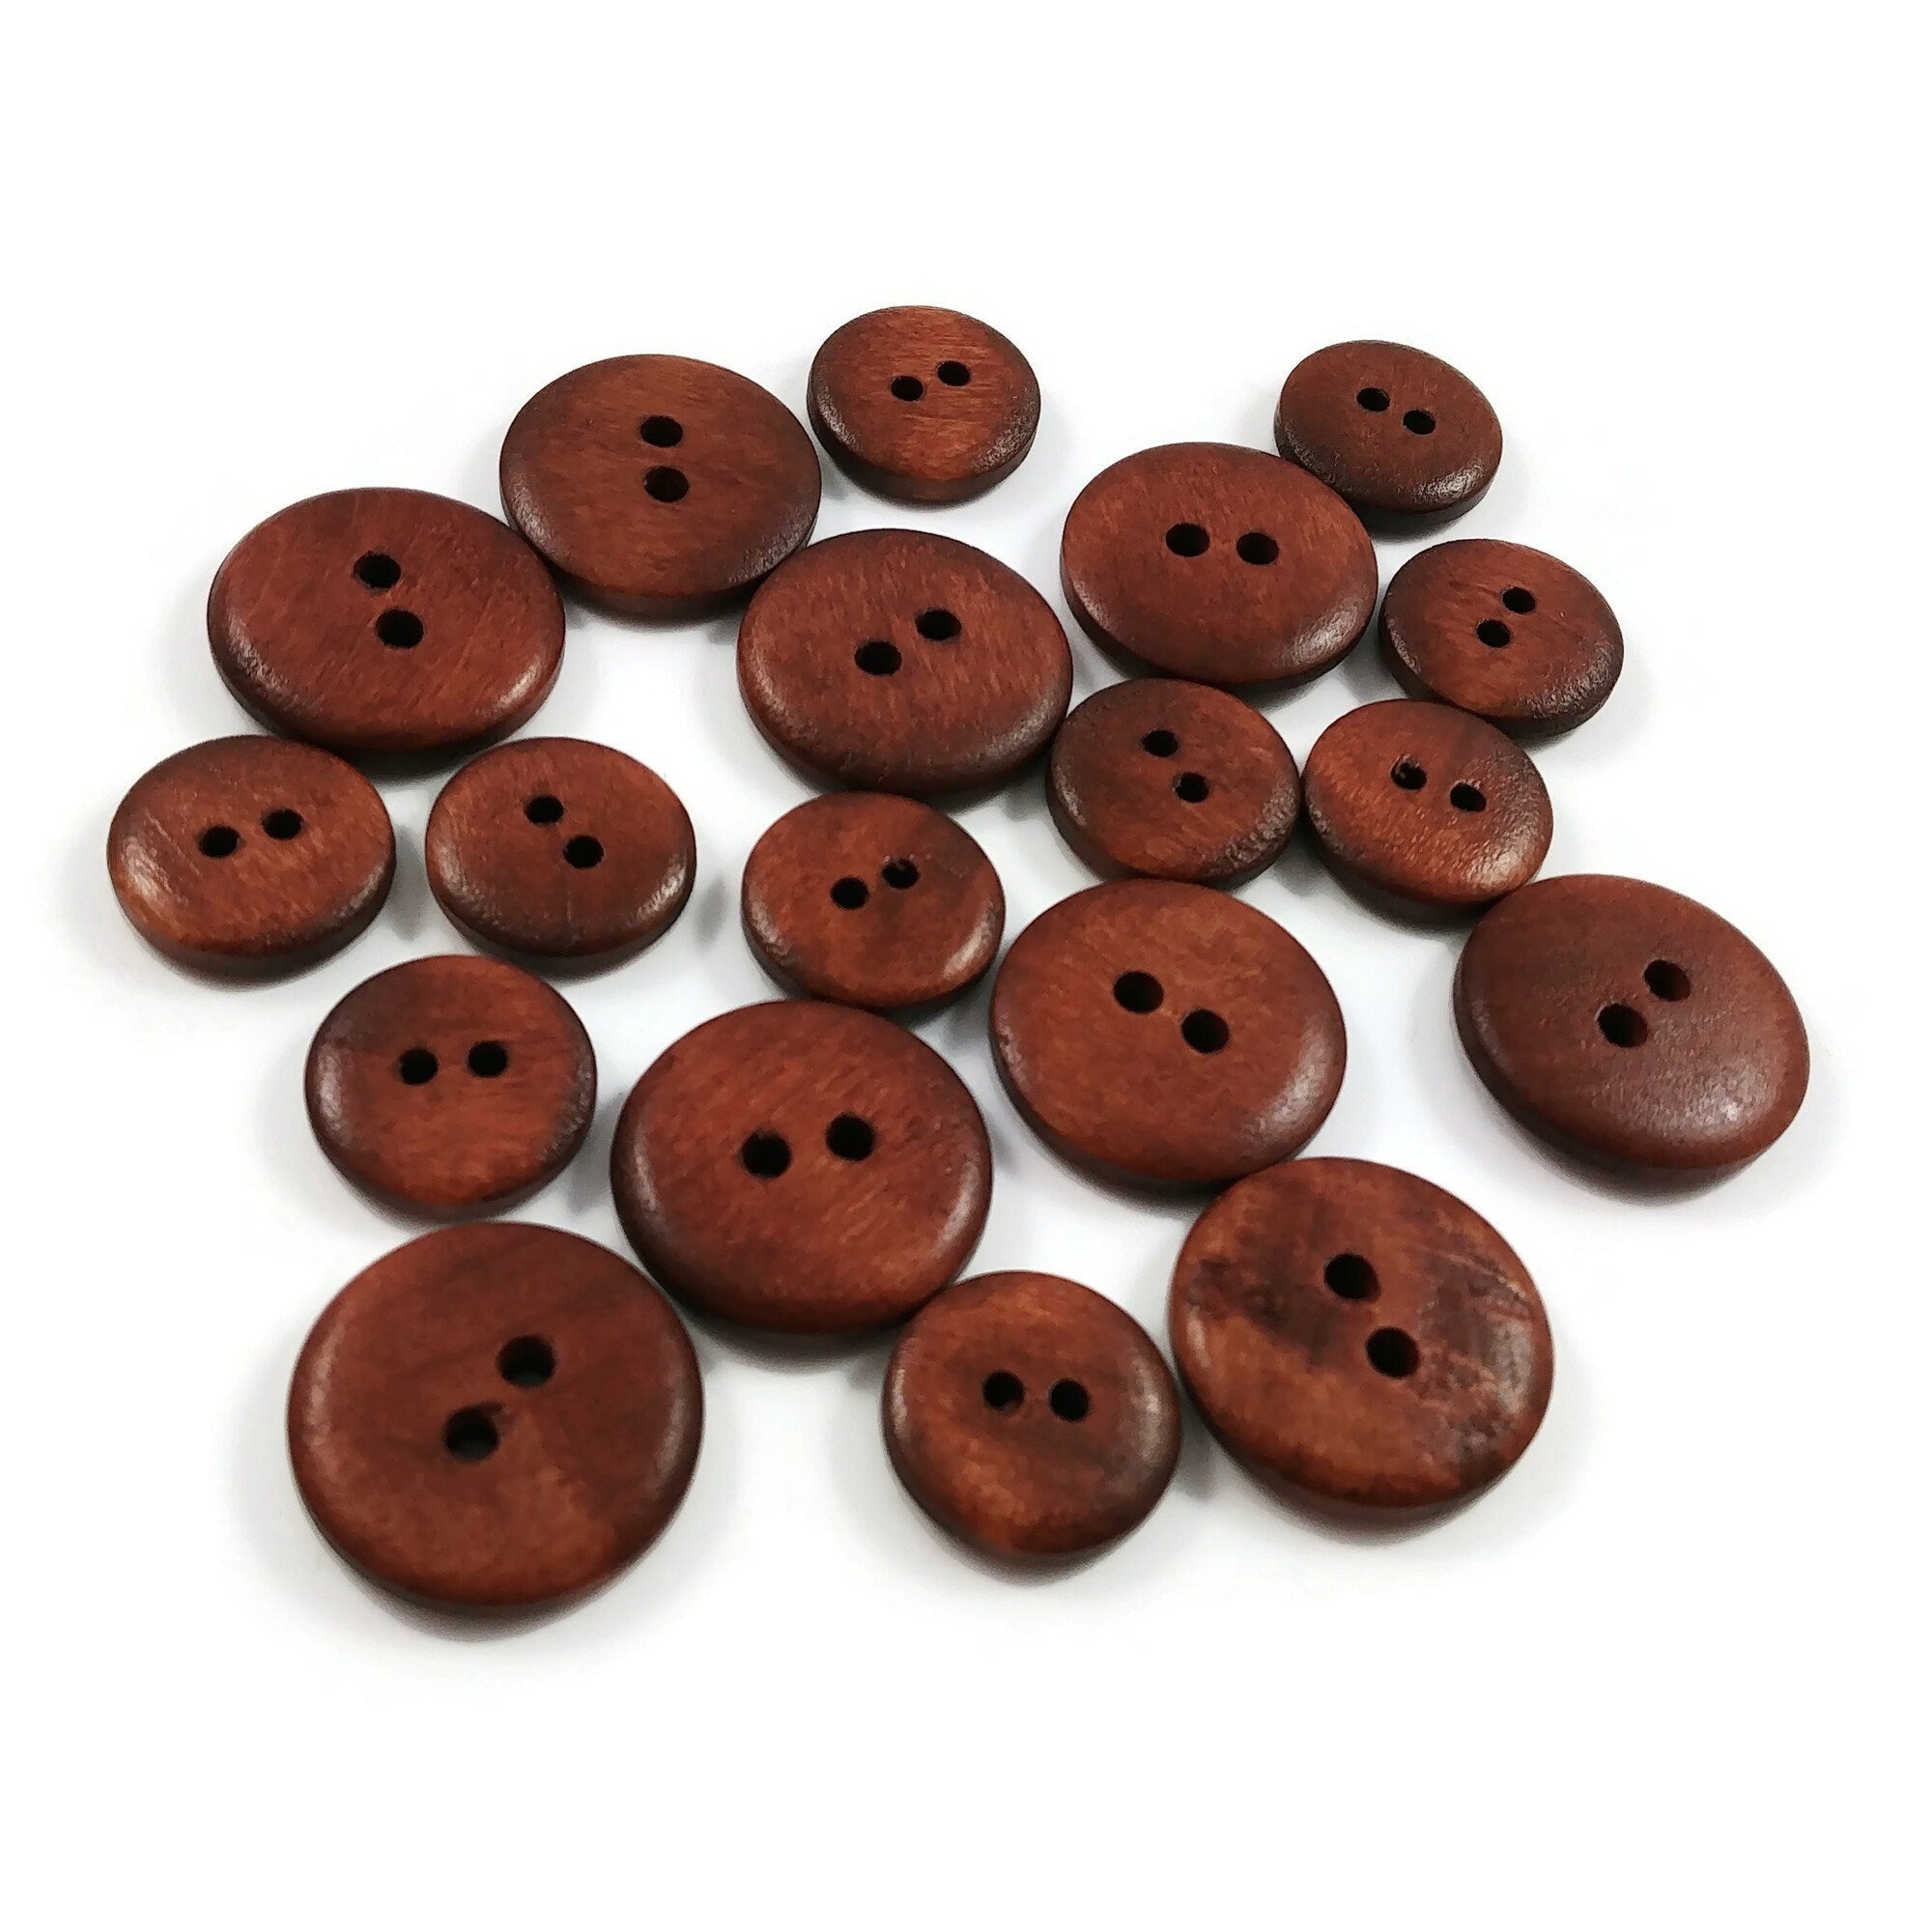  80 Pcs Wooden Buttons,4 Holes Round Assorted Brown Wood  Buttons,2 Sizes 20/25mm Large Natural Wooden Buttons for Crafts Sewing  Clothing Sweater Coat DIY Decorations